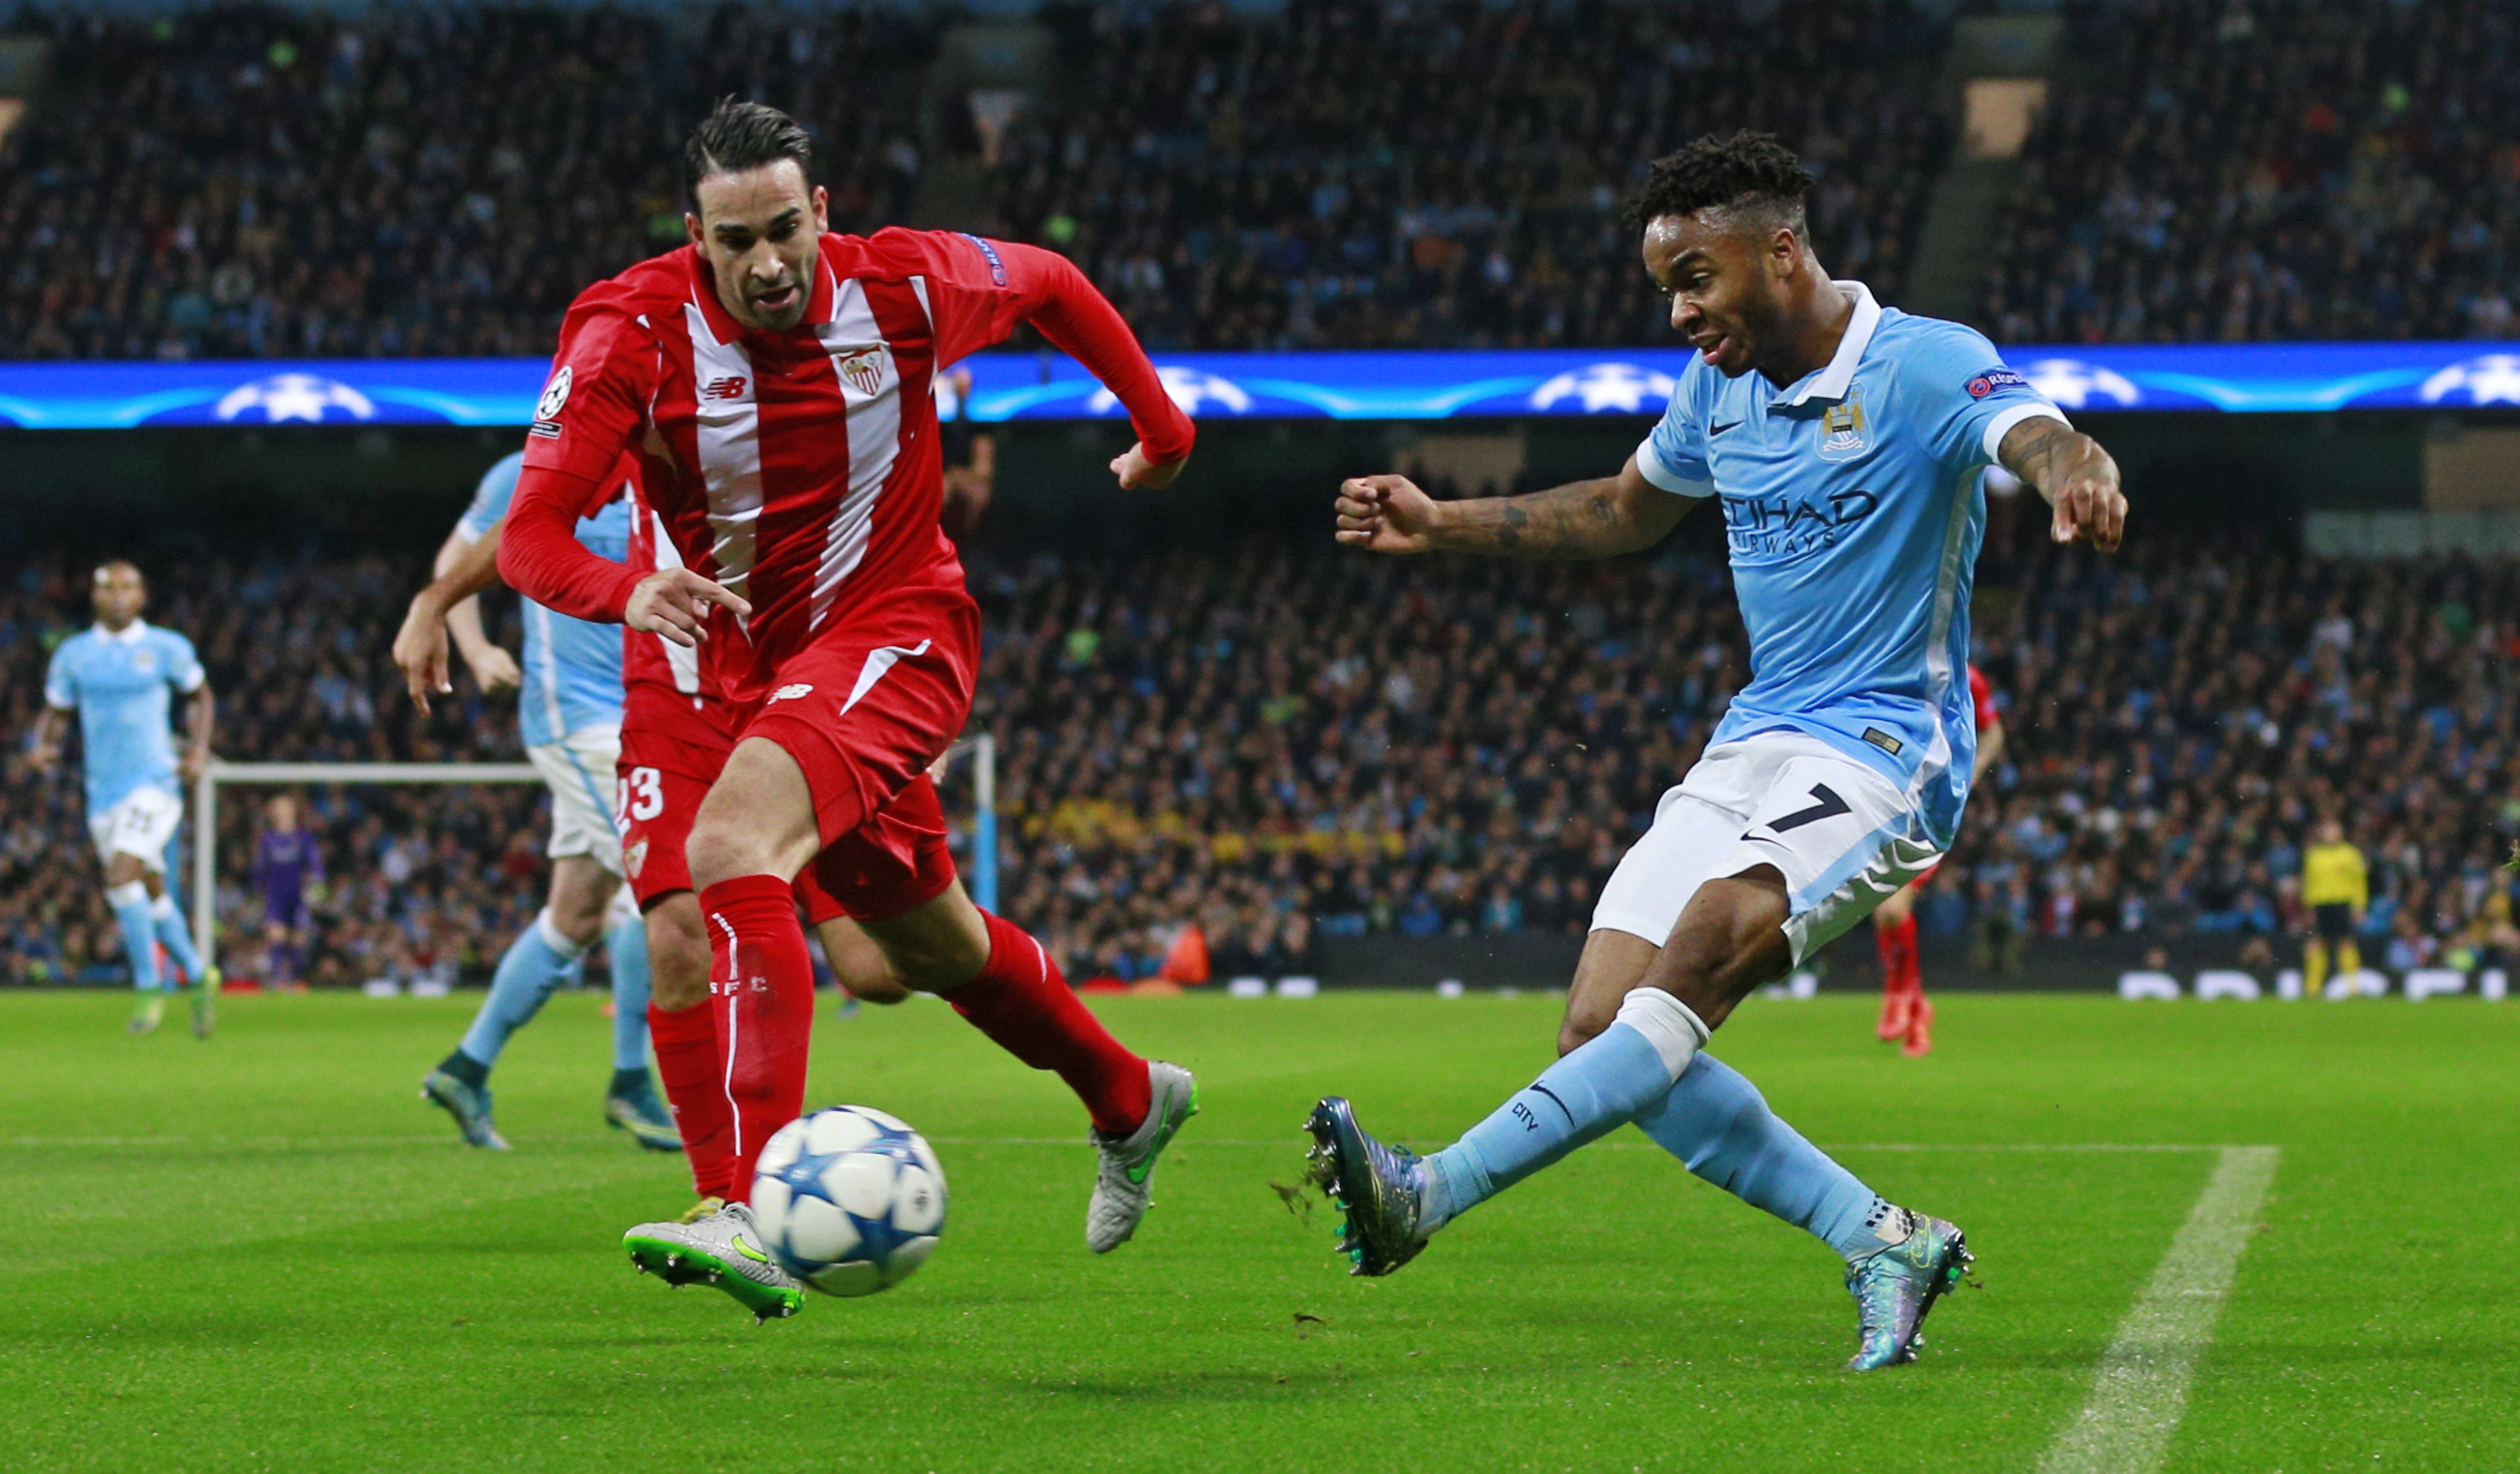 Football - Manchester City v Sevilla - UEFA Champions League Group Stage - Group D - Etihad Stadium, Manchester, England - 21/10/15 Manchester City's Raheem Sterling in action Action Images via Reuters / Jason Cairnduff Livepic EDITORIAL USE ONLY.